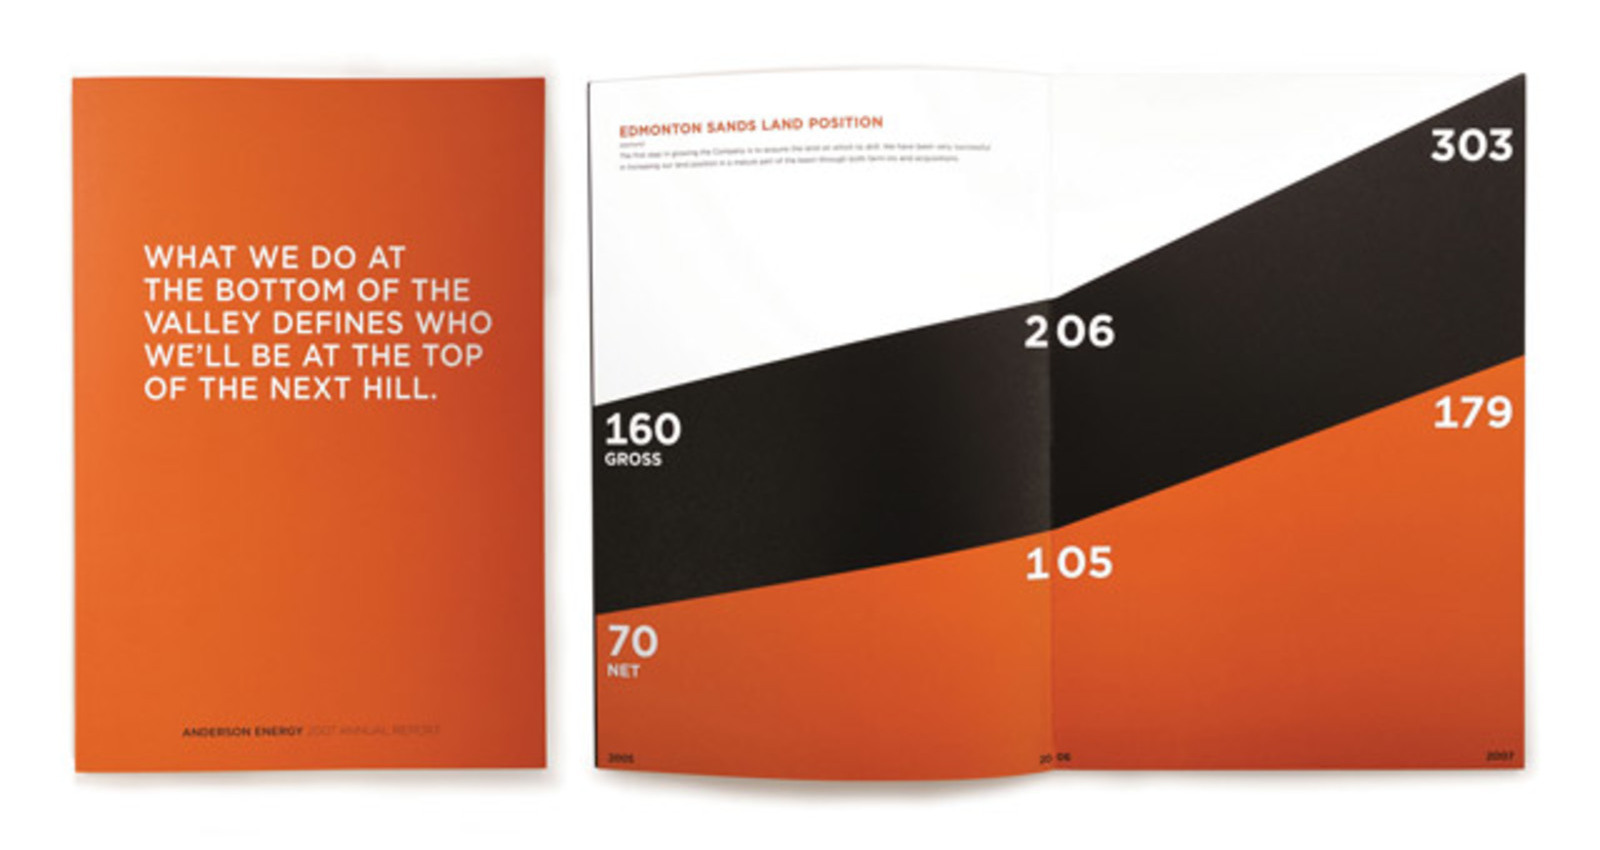 Anderson Energy 2007 Annual Report